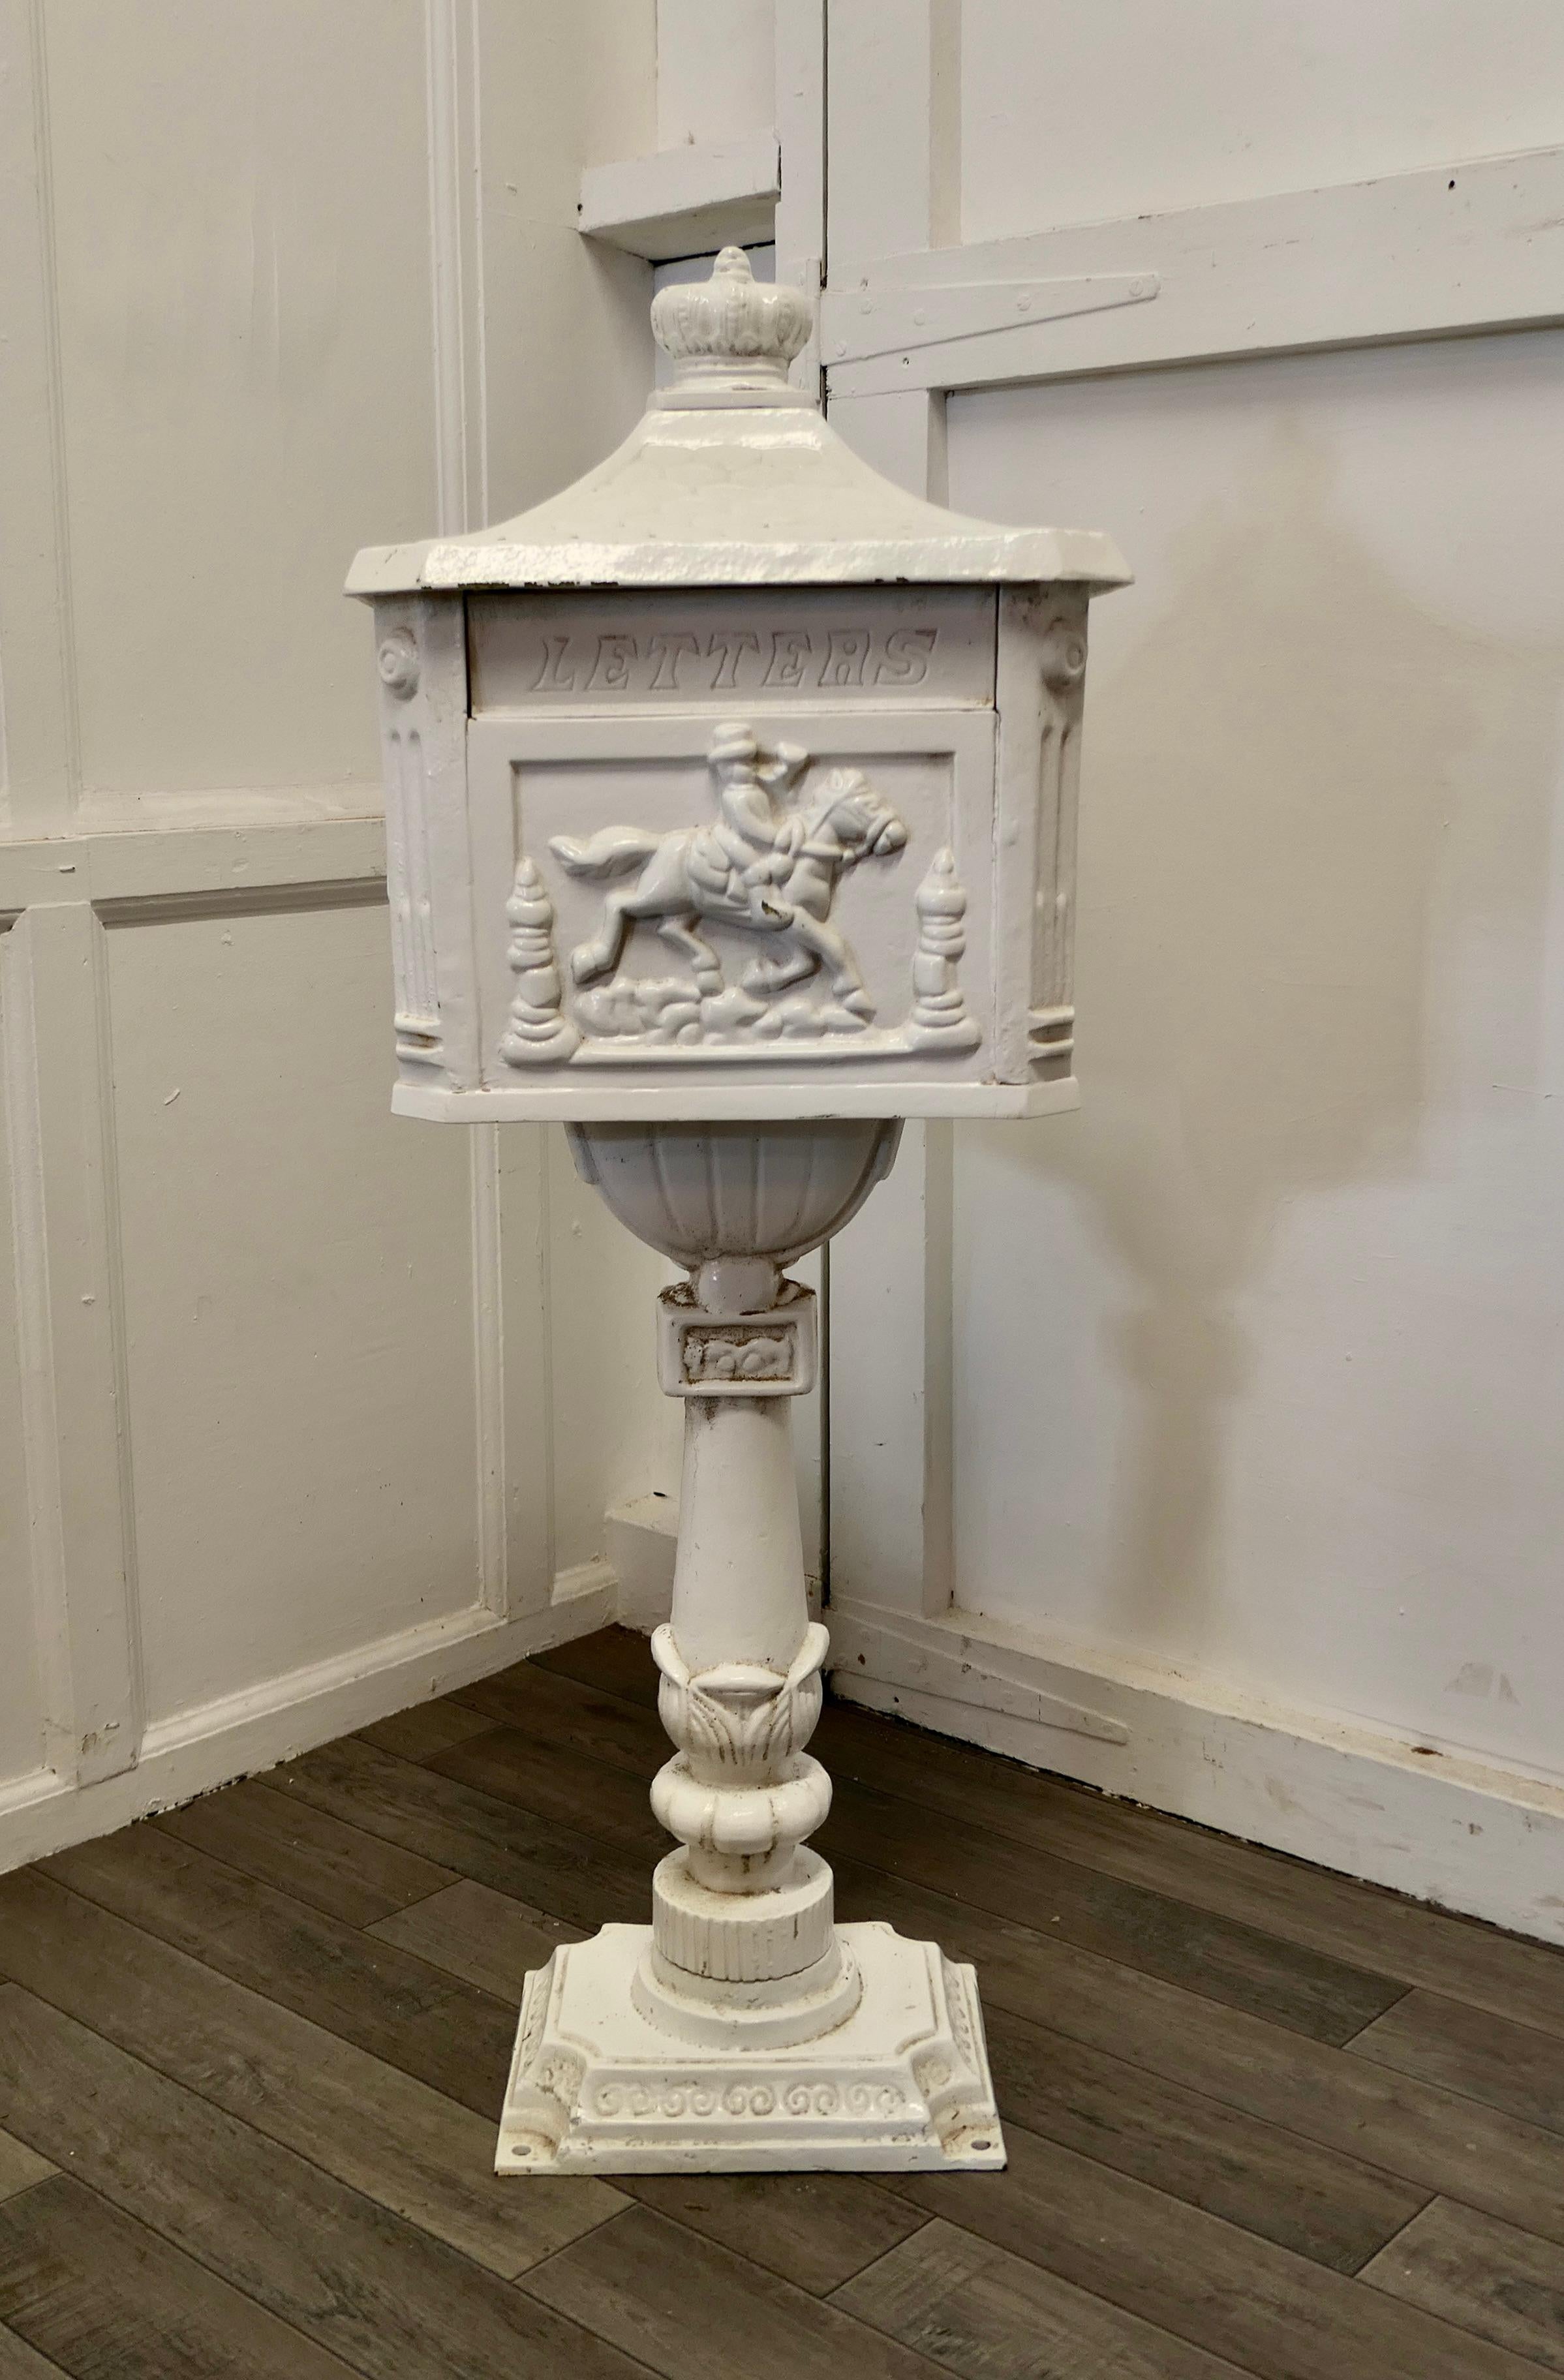 A tall ground standing mail box, letter box
A great piece decorated with country scenes and a crown on the top
The mail box is free standing and can be bolted to the ground, it has a letter box sprung opening to the front and a large storage